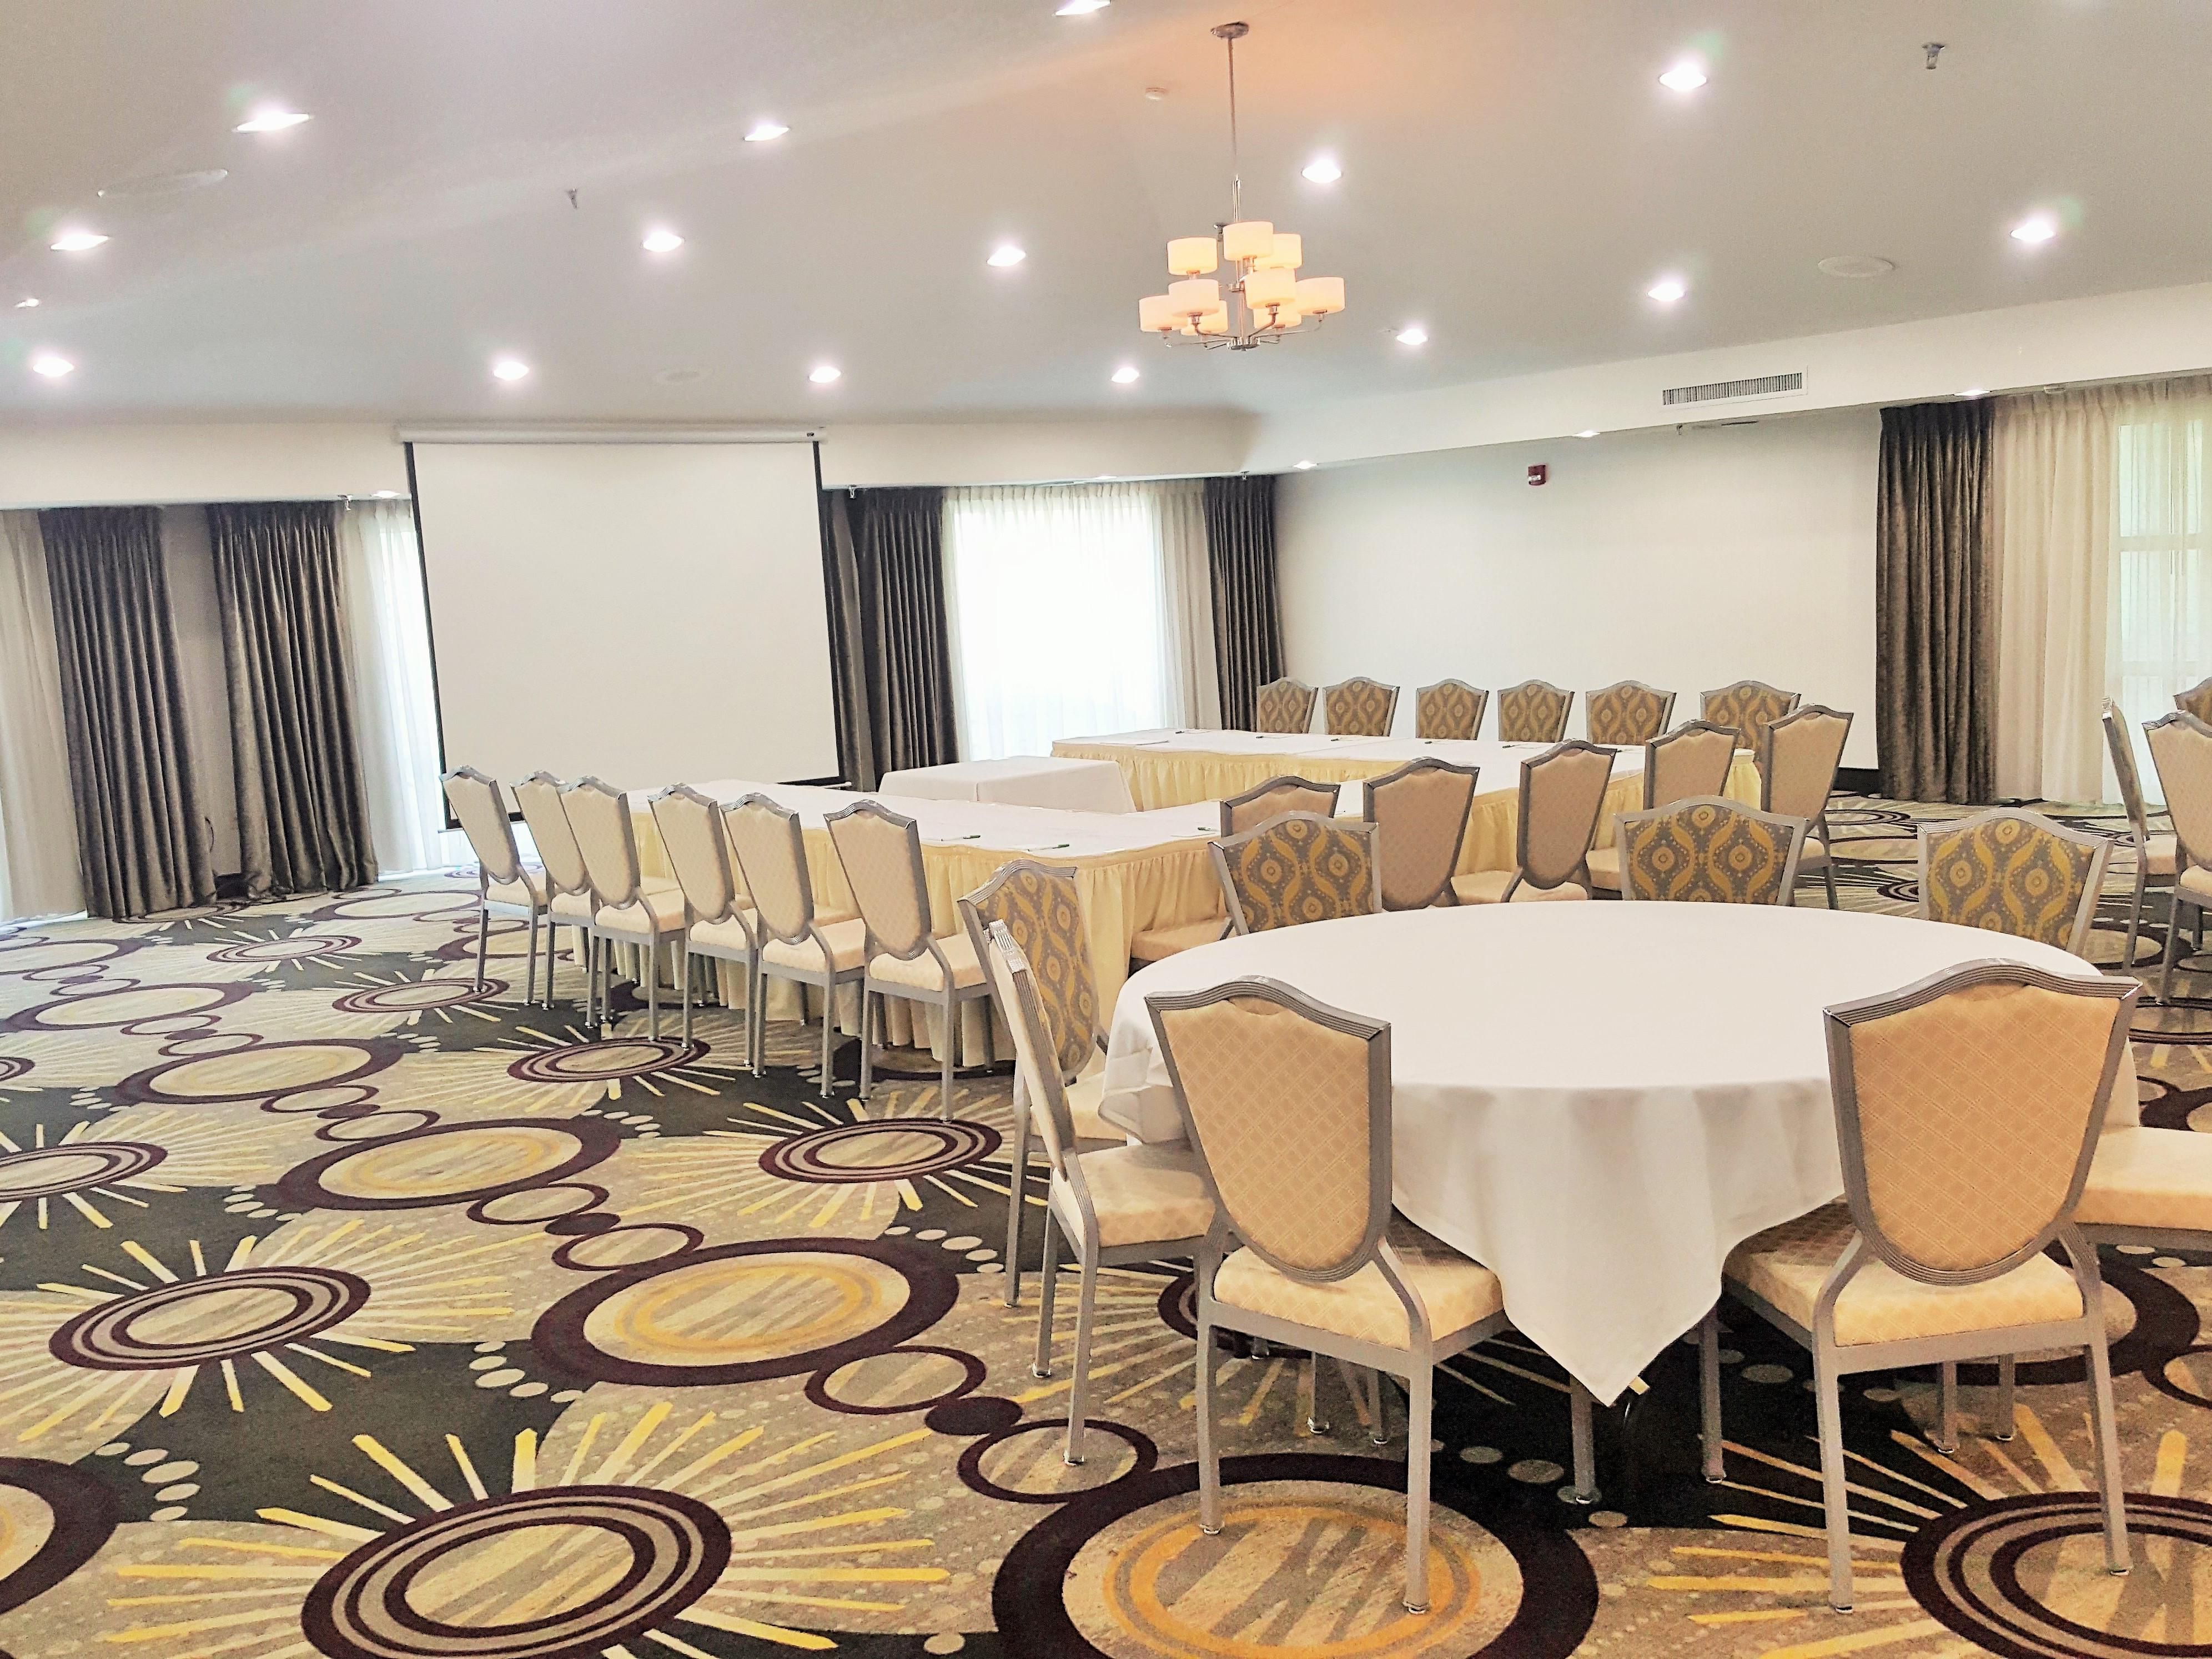 Whether you’re a first-timer or an experienced organizer, we make planning and booking your next meeting room easier than ever. Our staff will help you plan each moment, so you can focus on using the meeting space for your best meeting yet.